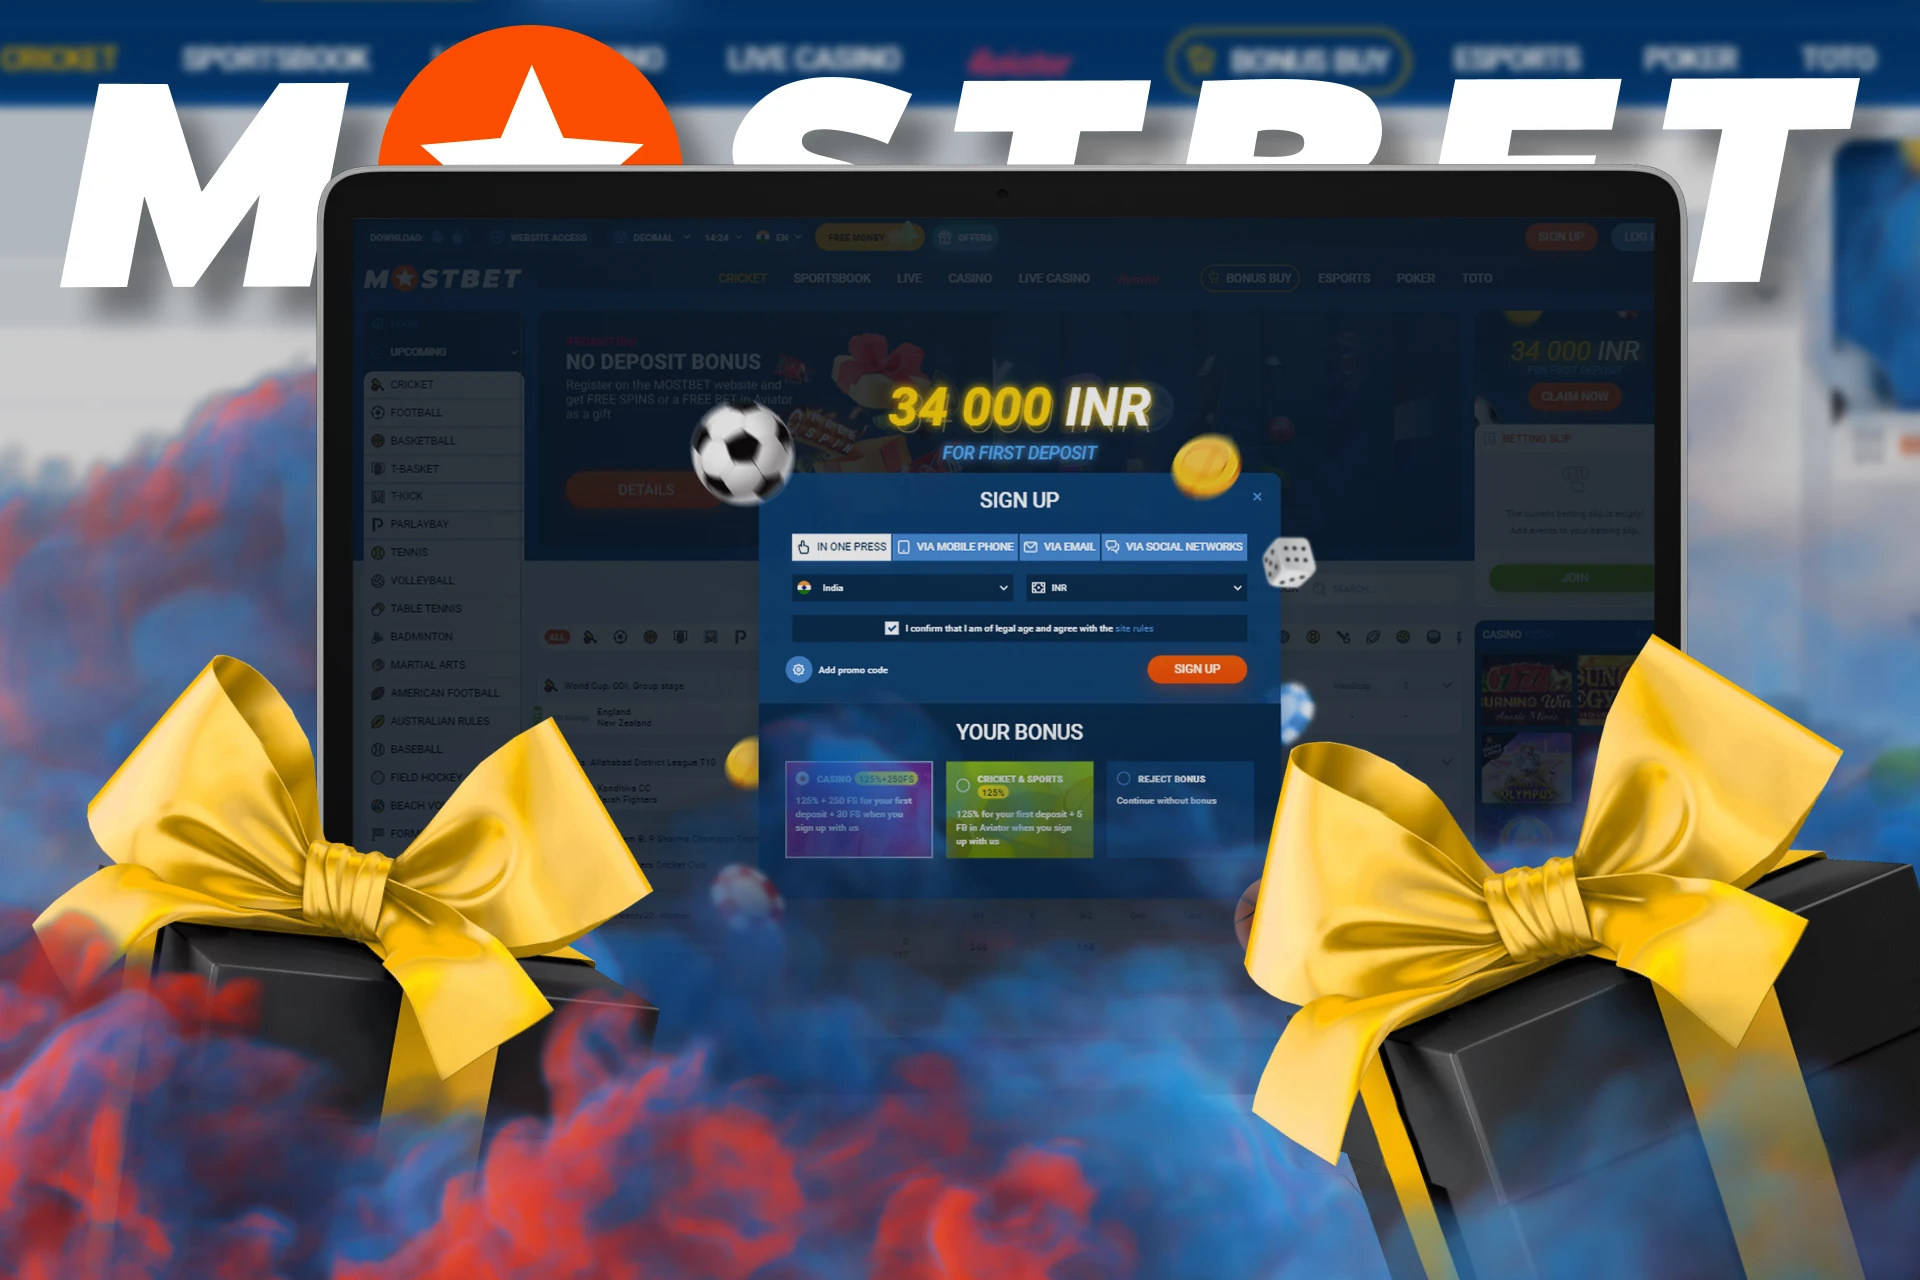 Get a special welcome bonus for your first deposit at Mostbet.